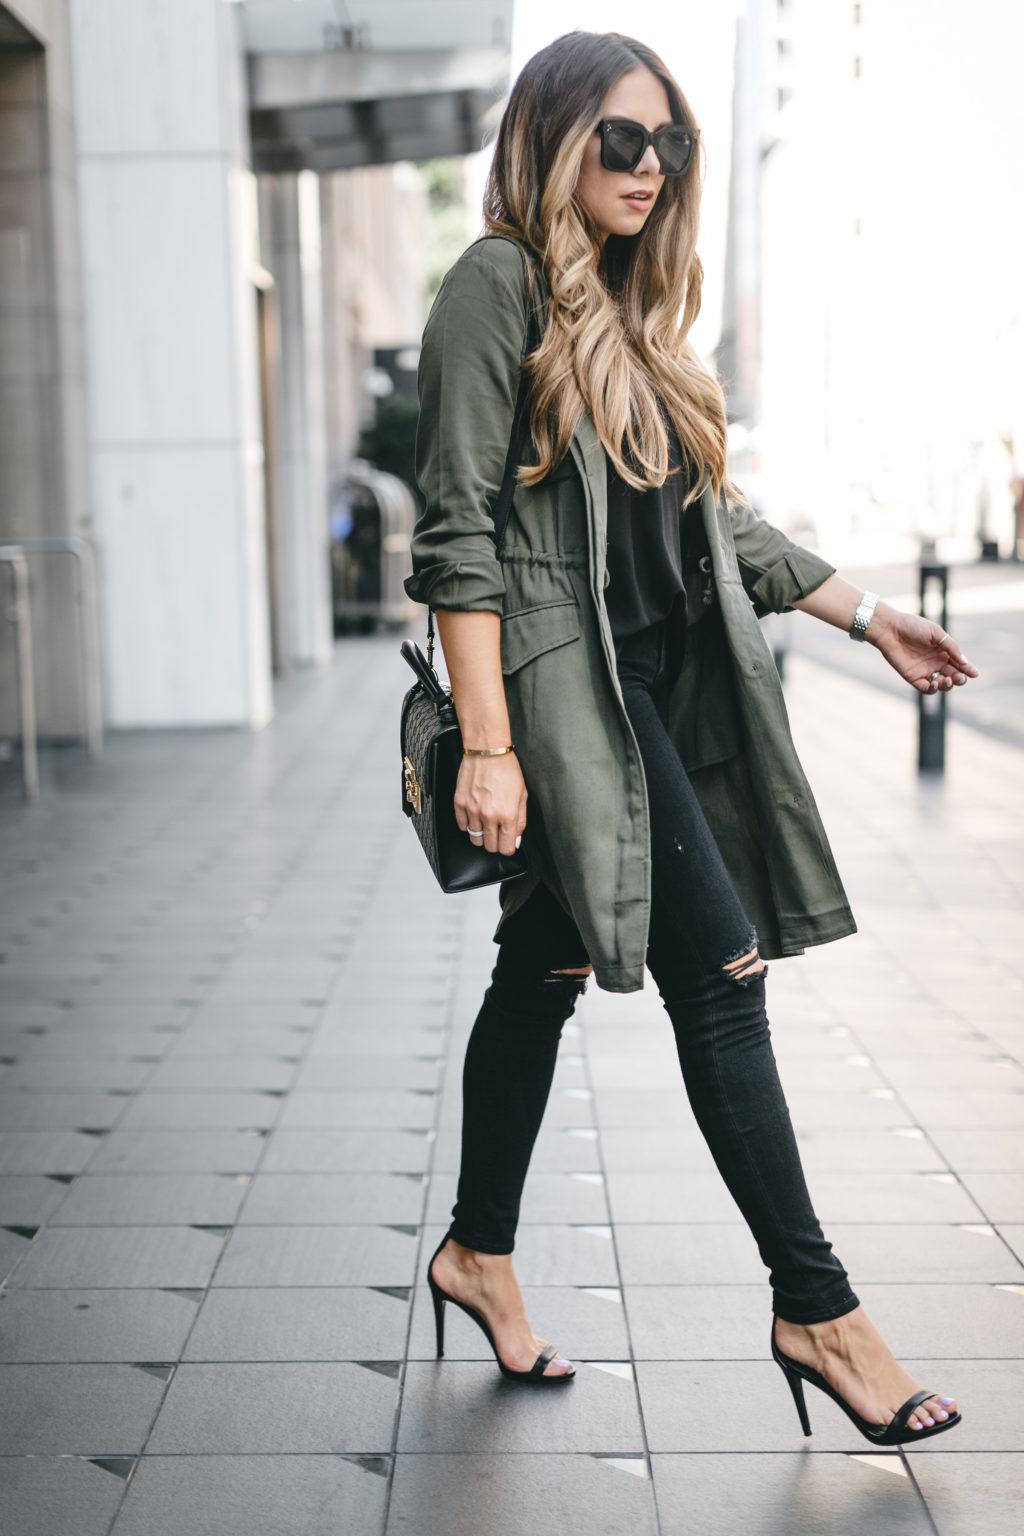 Styling an army green trench coat